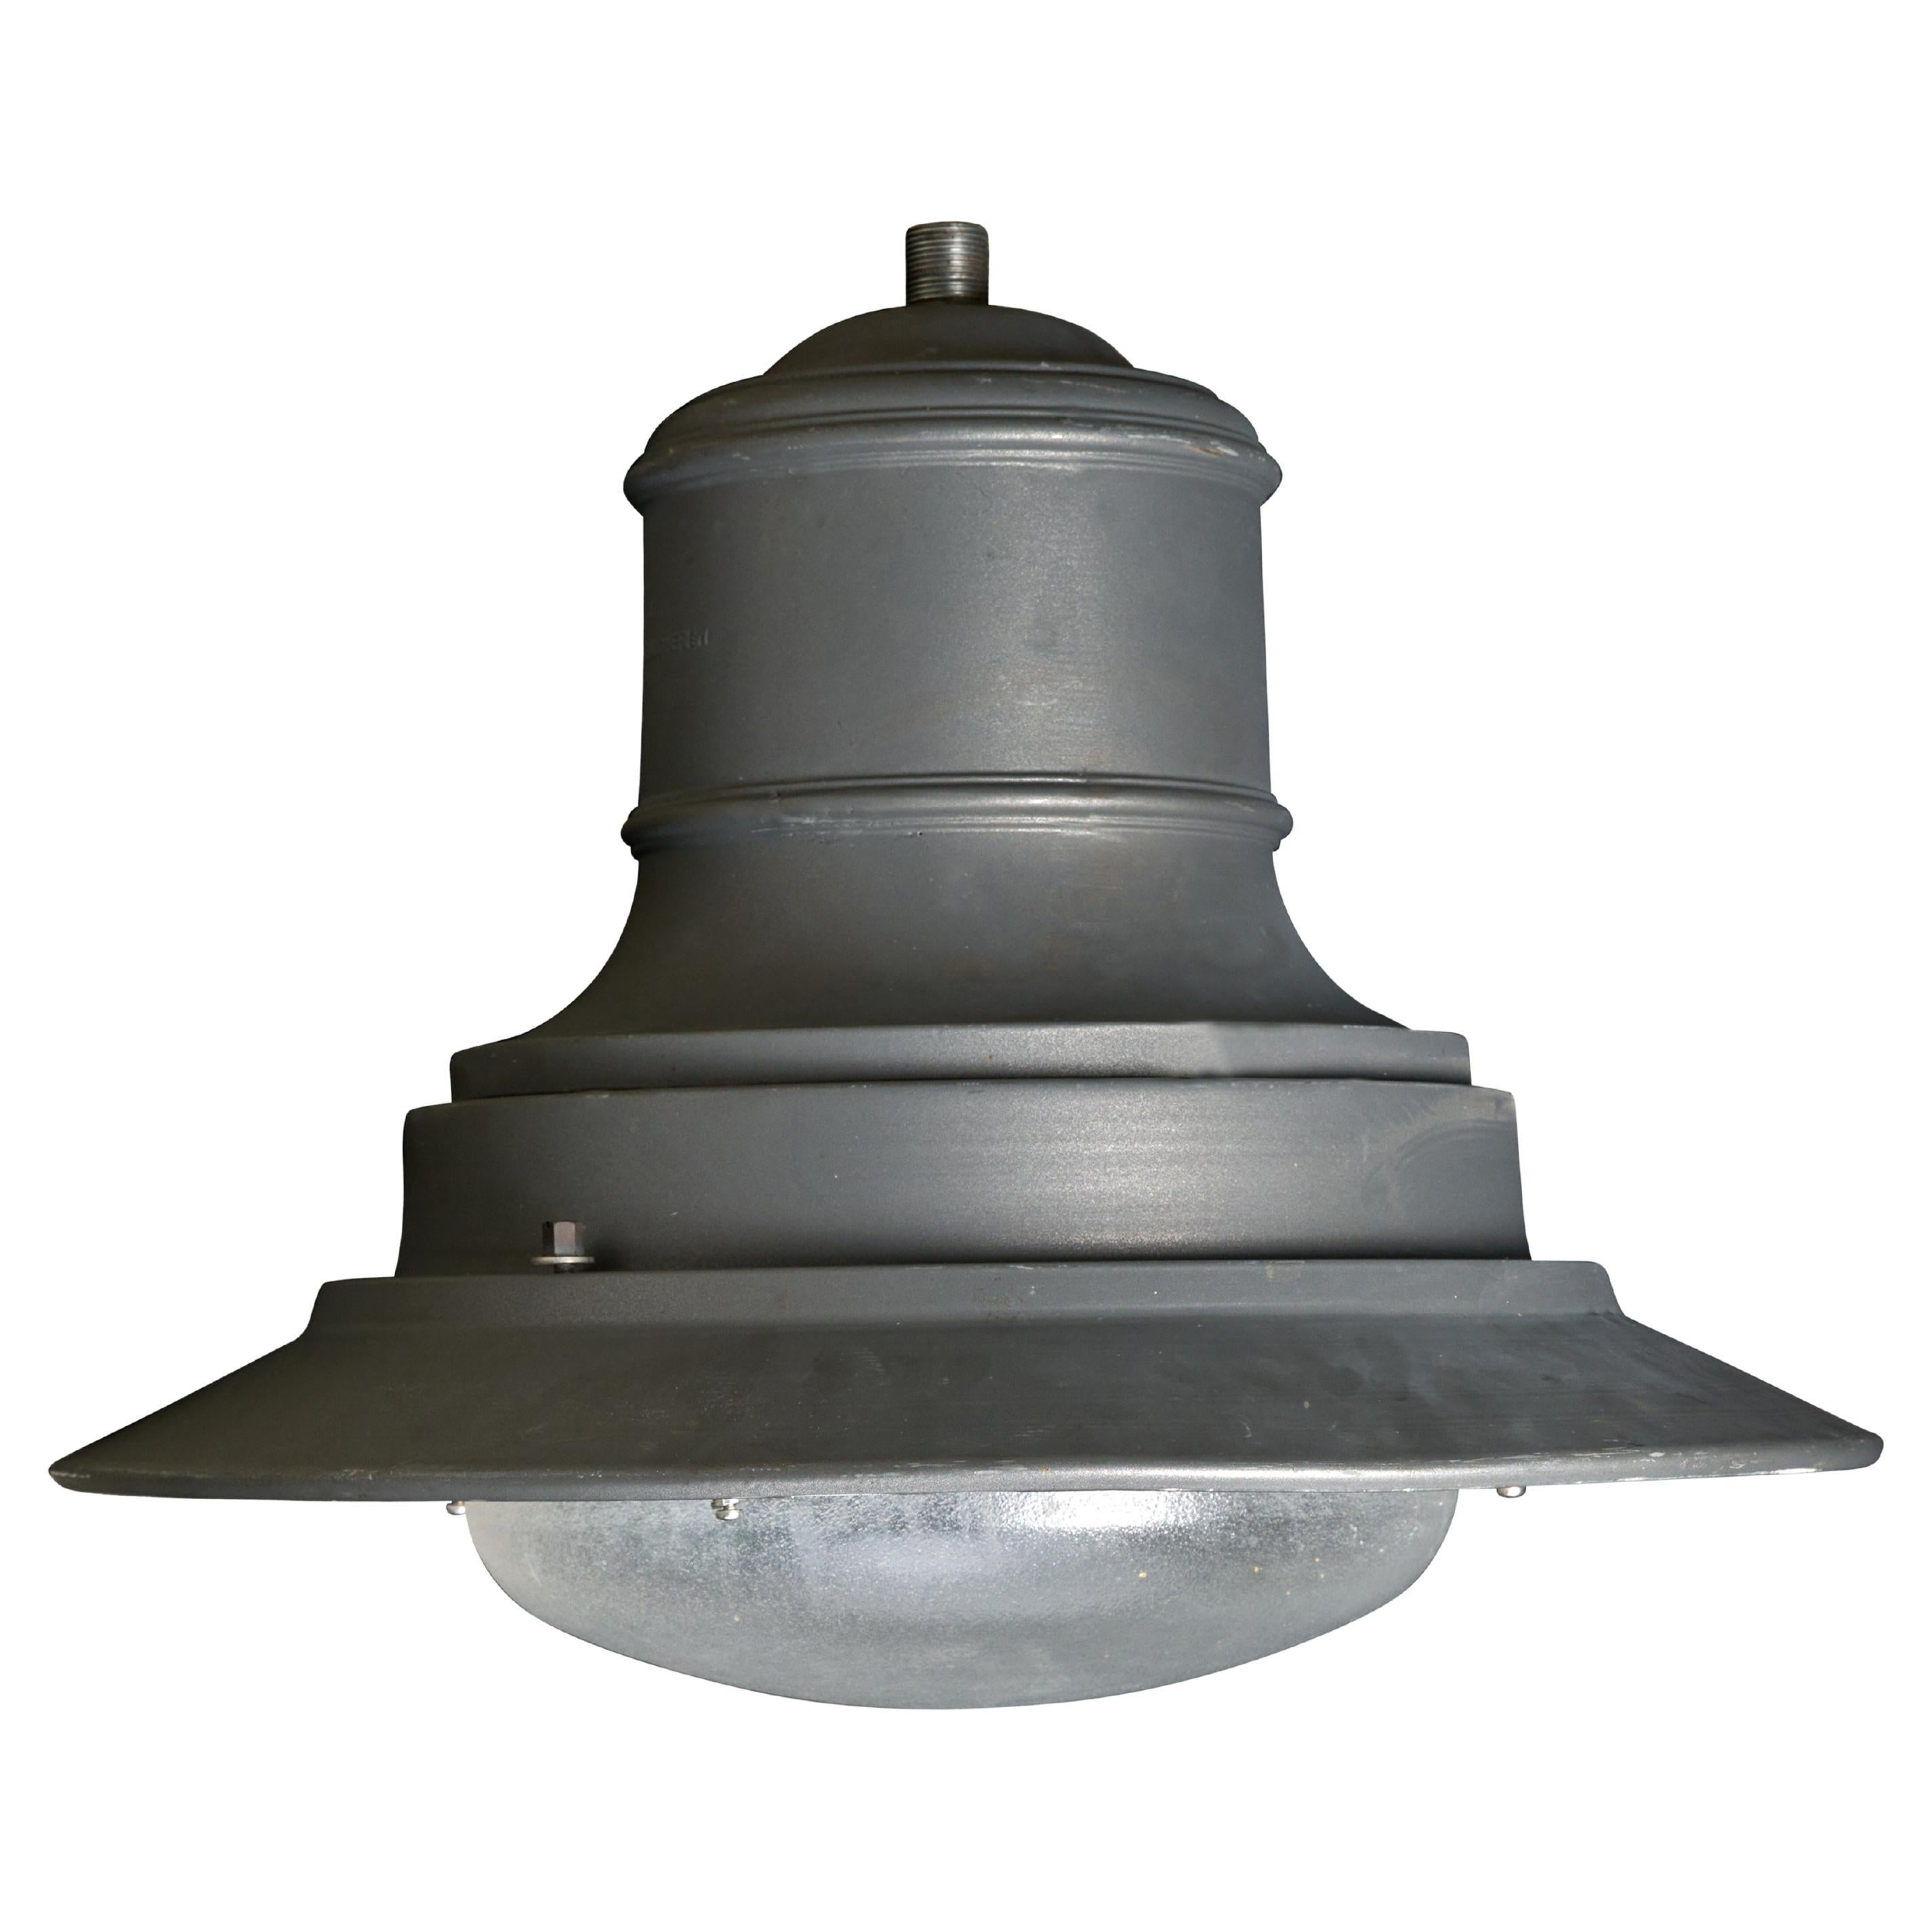 Italian Industrial Light Fixture With Cool Design For Sale